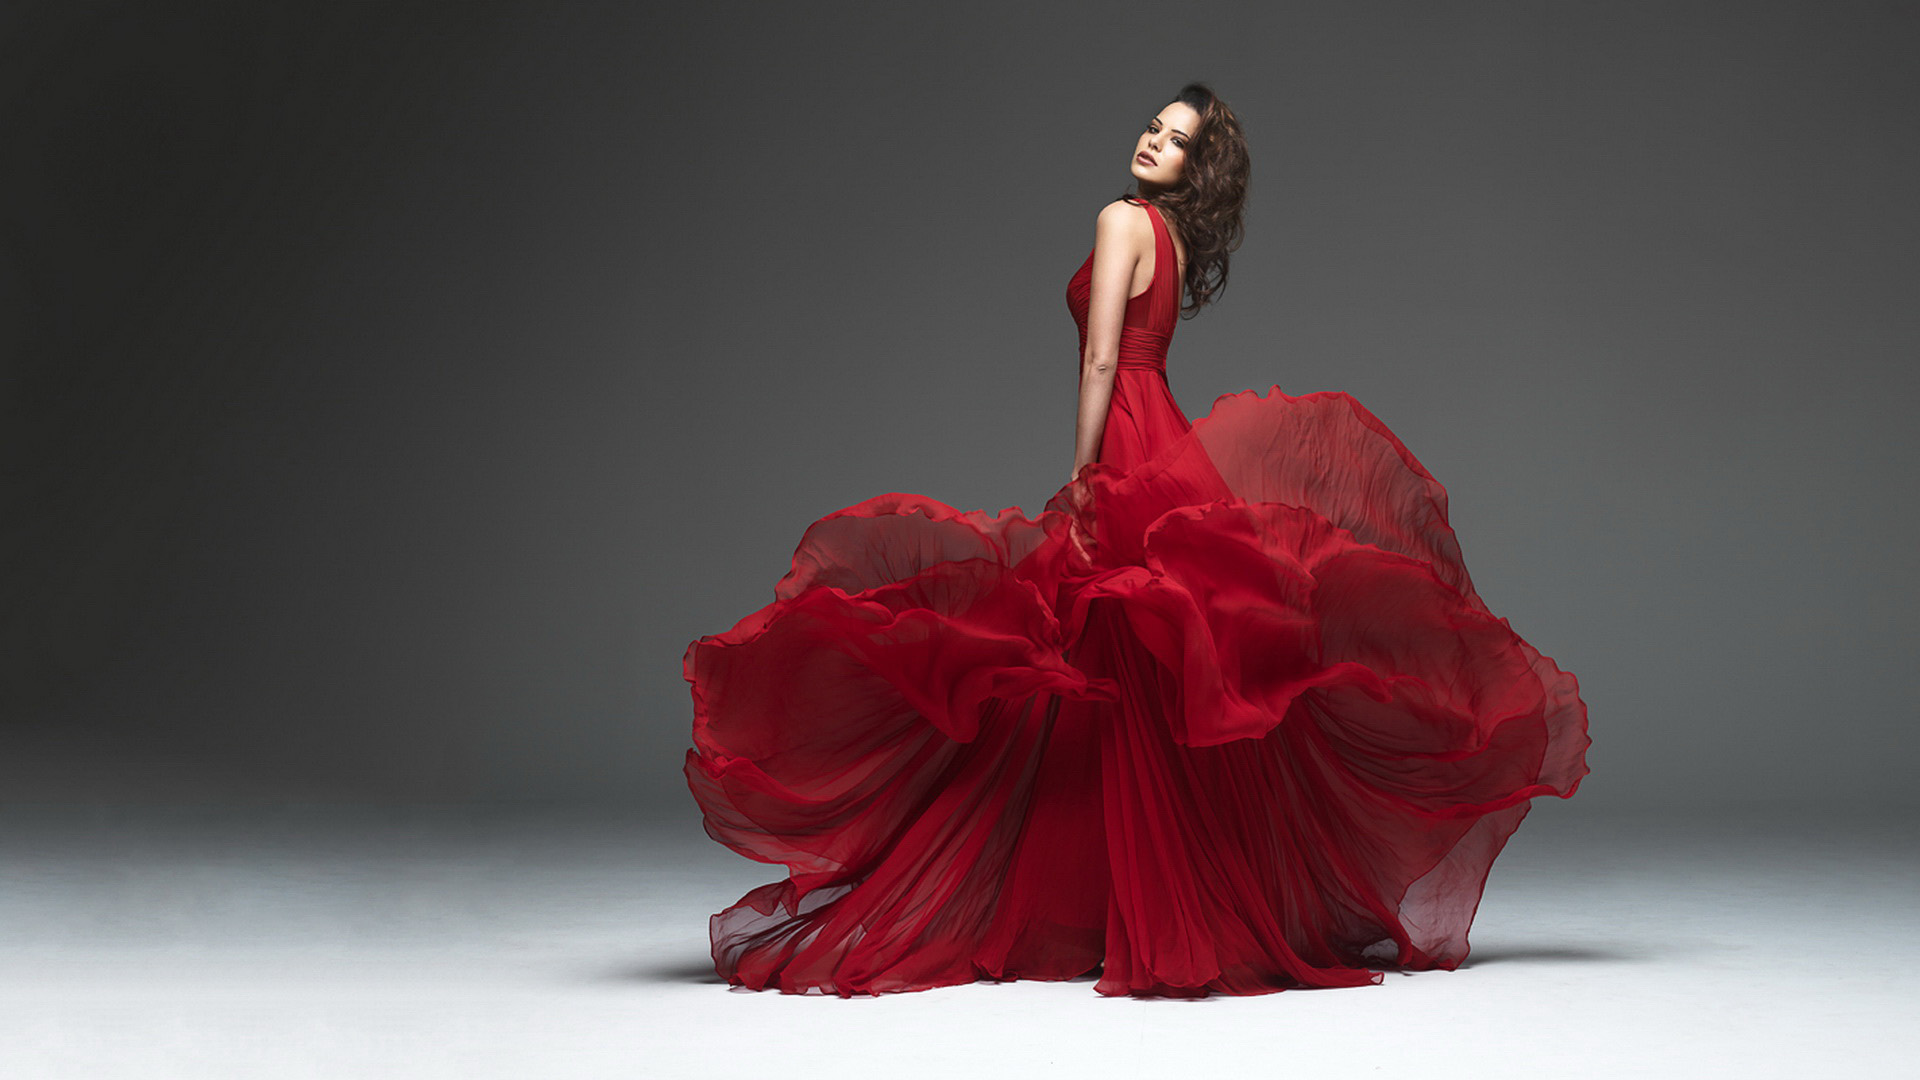 dress wallpaper,dress,gown,red,clothing,fashion model